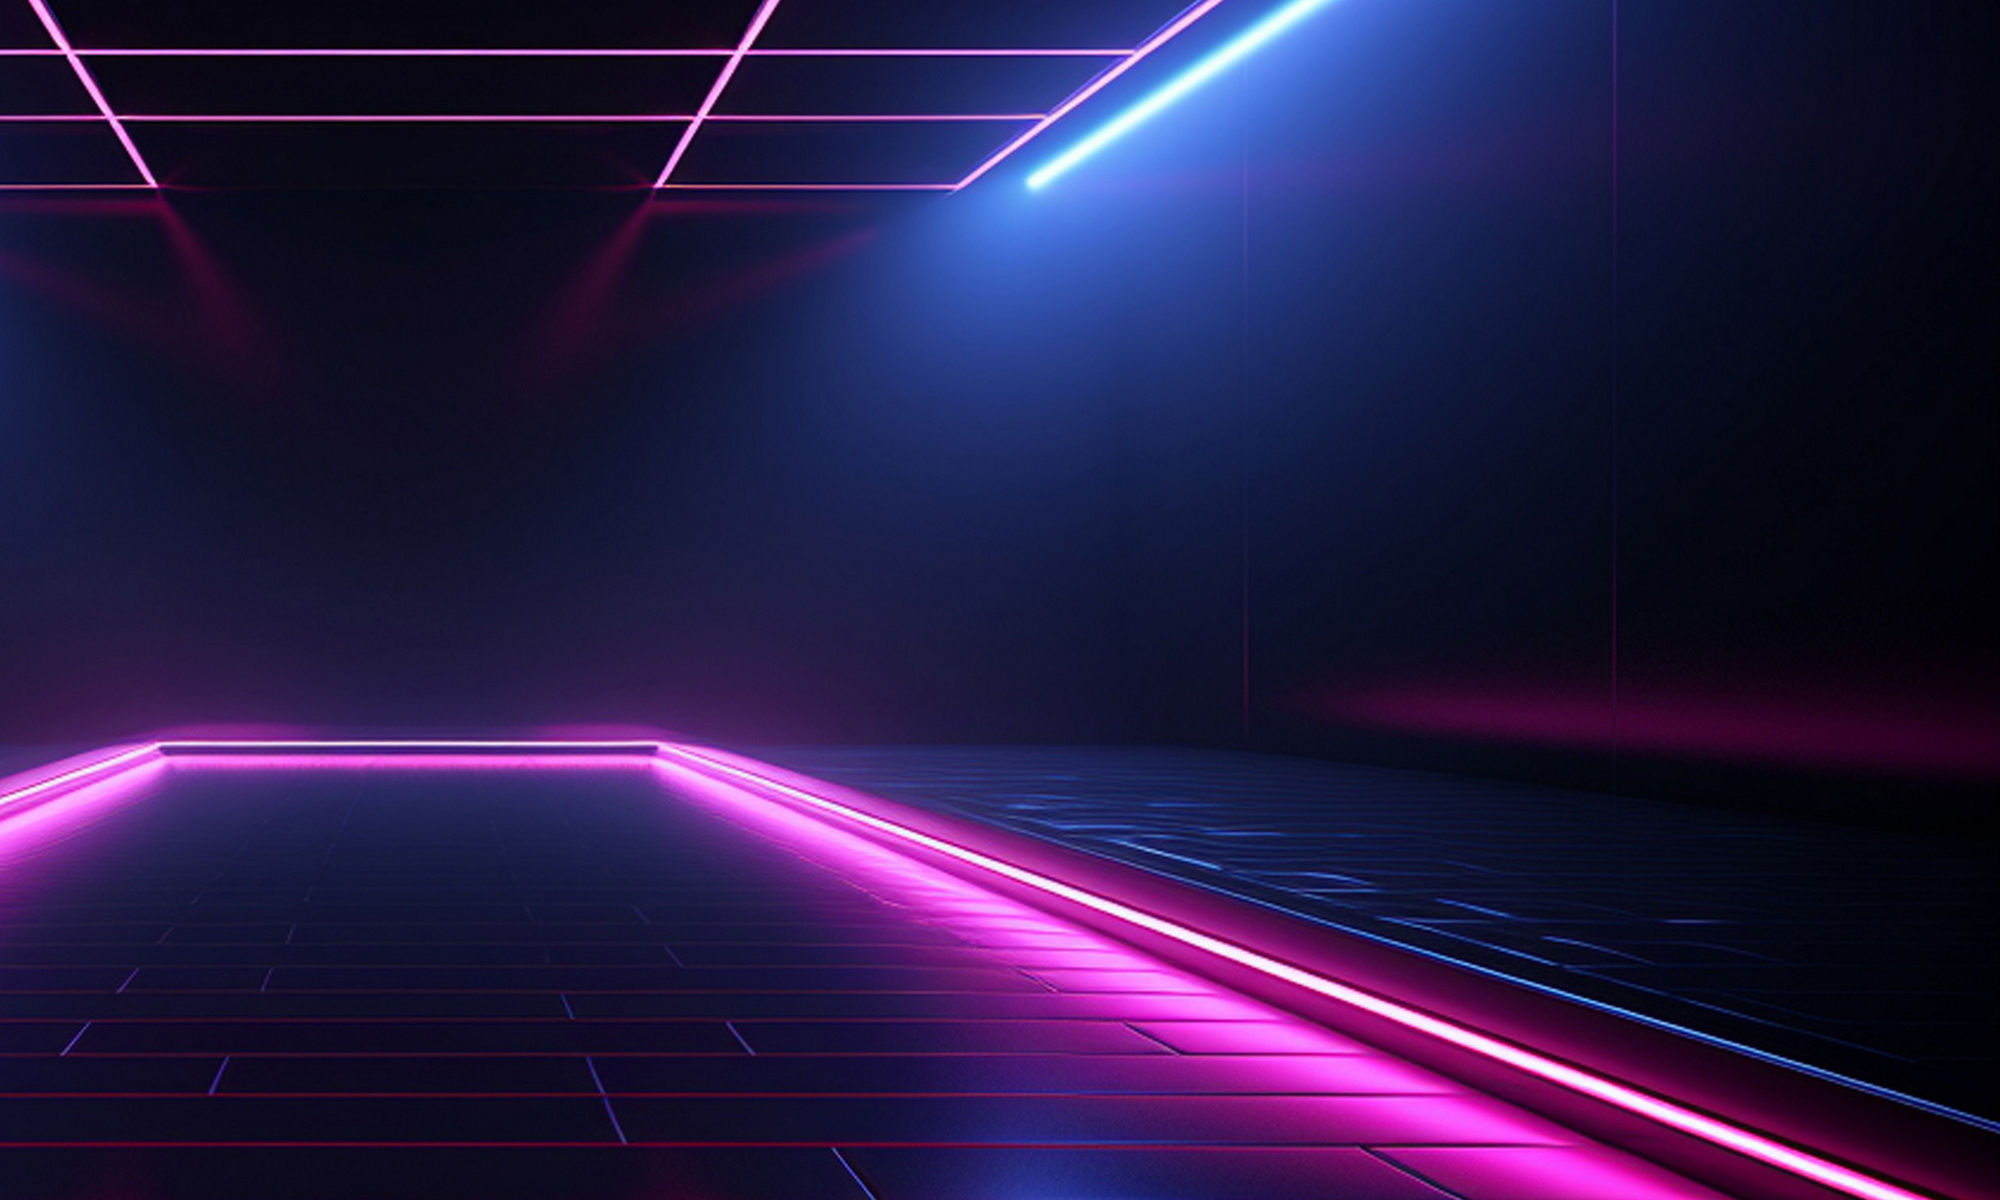 3D abstract render of pink and blue lighted bars and lines receding to background